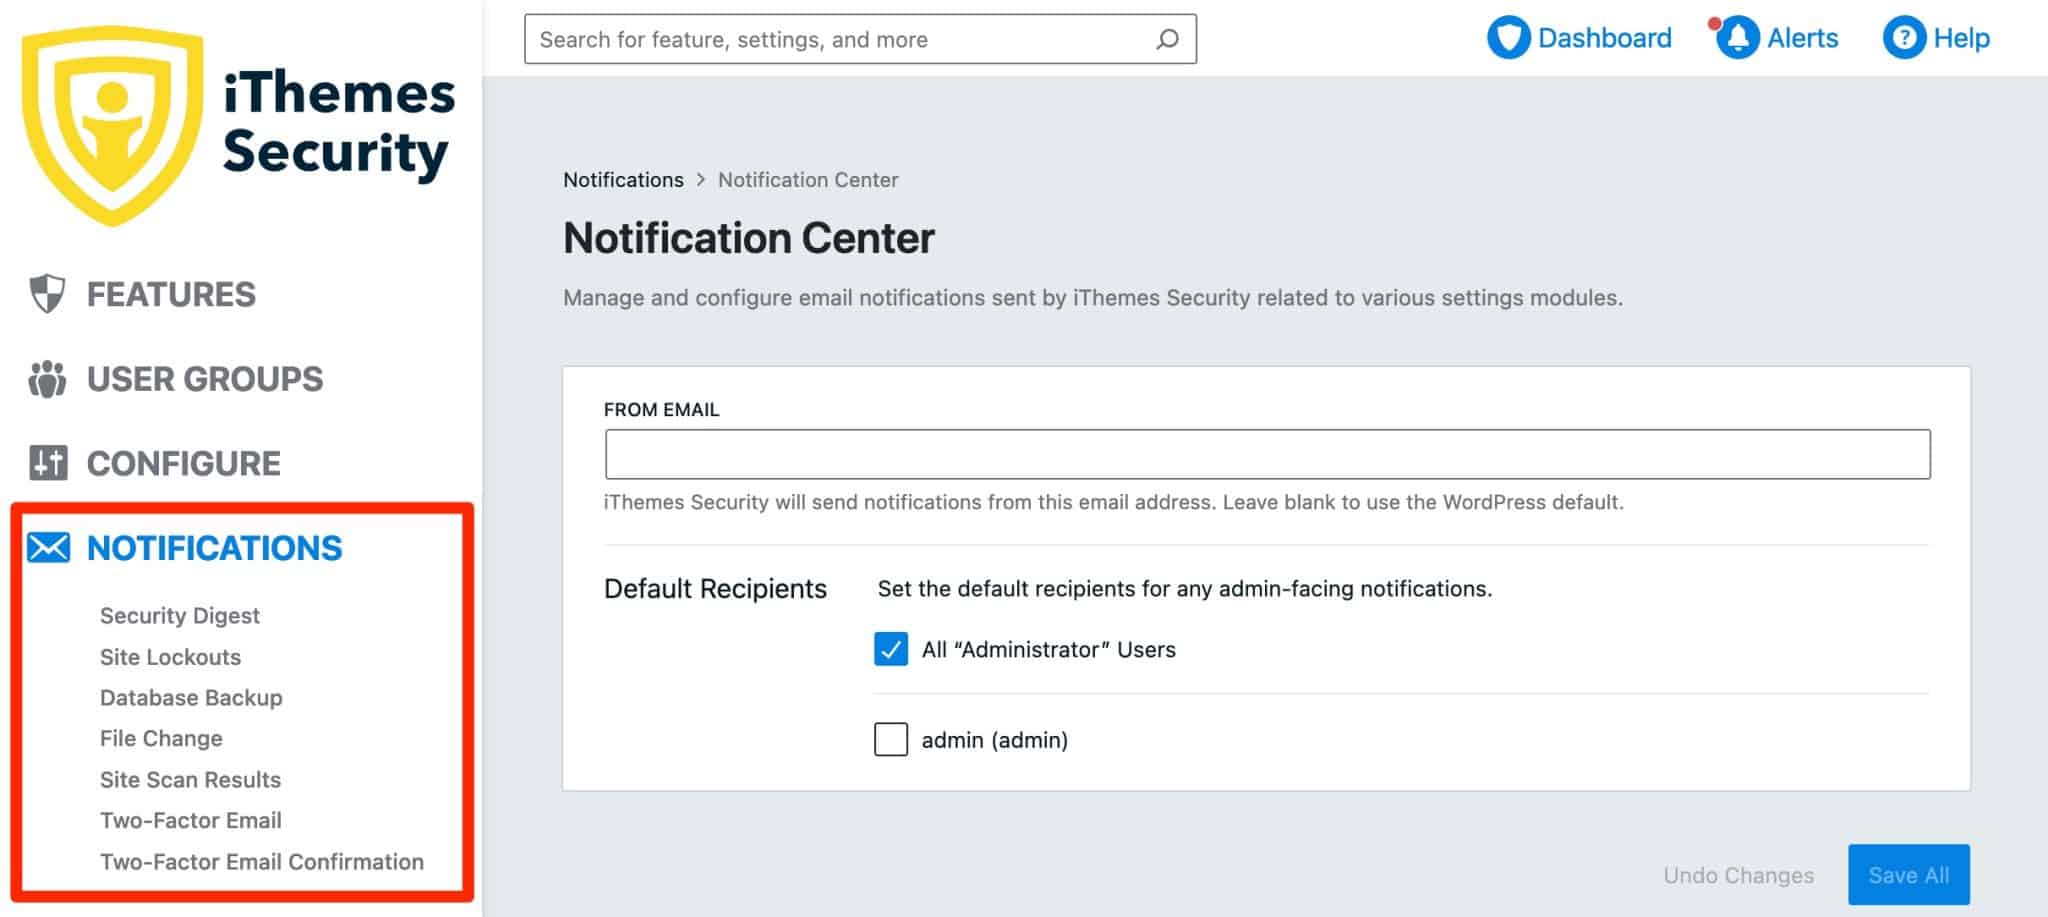 iThemes Security notification settings.